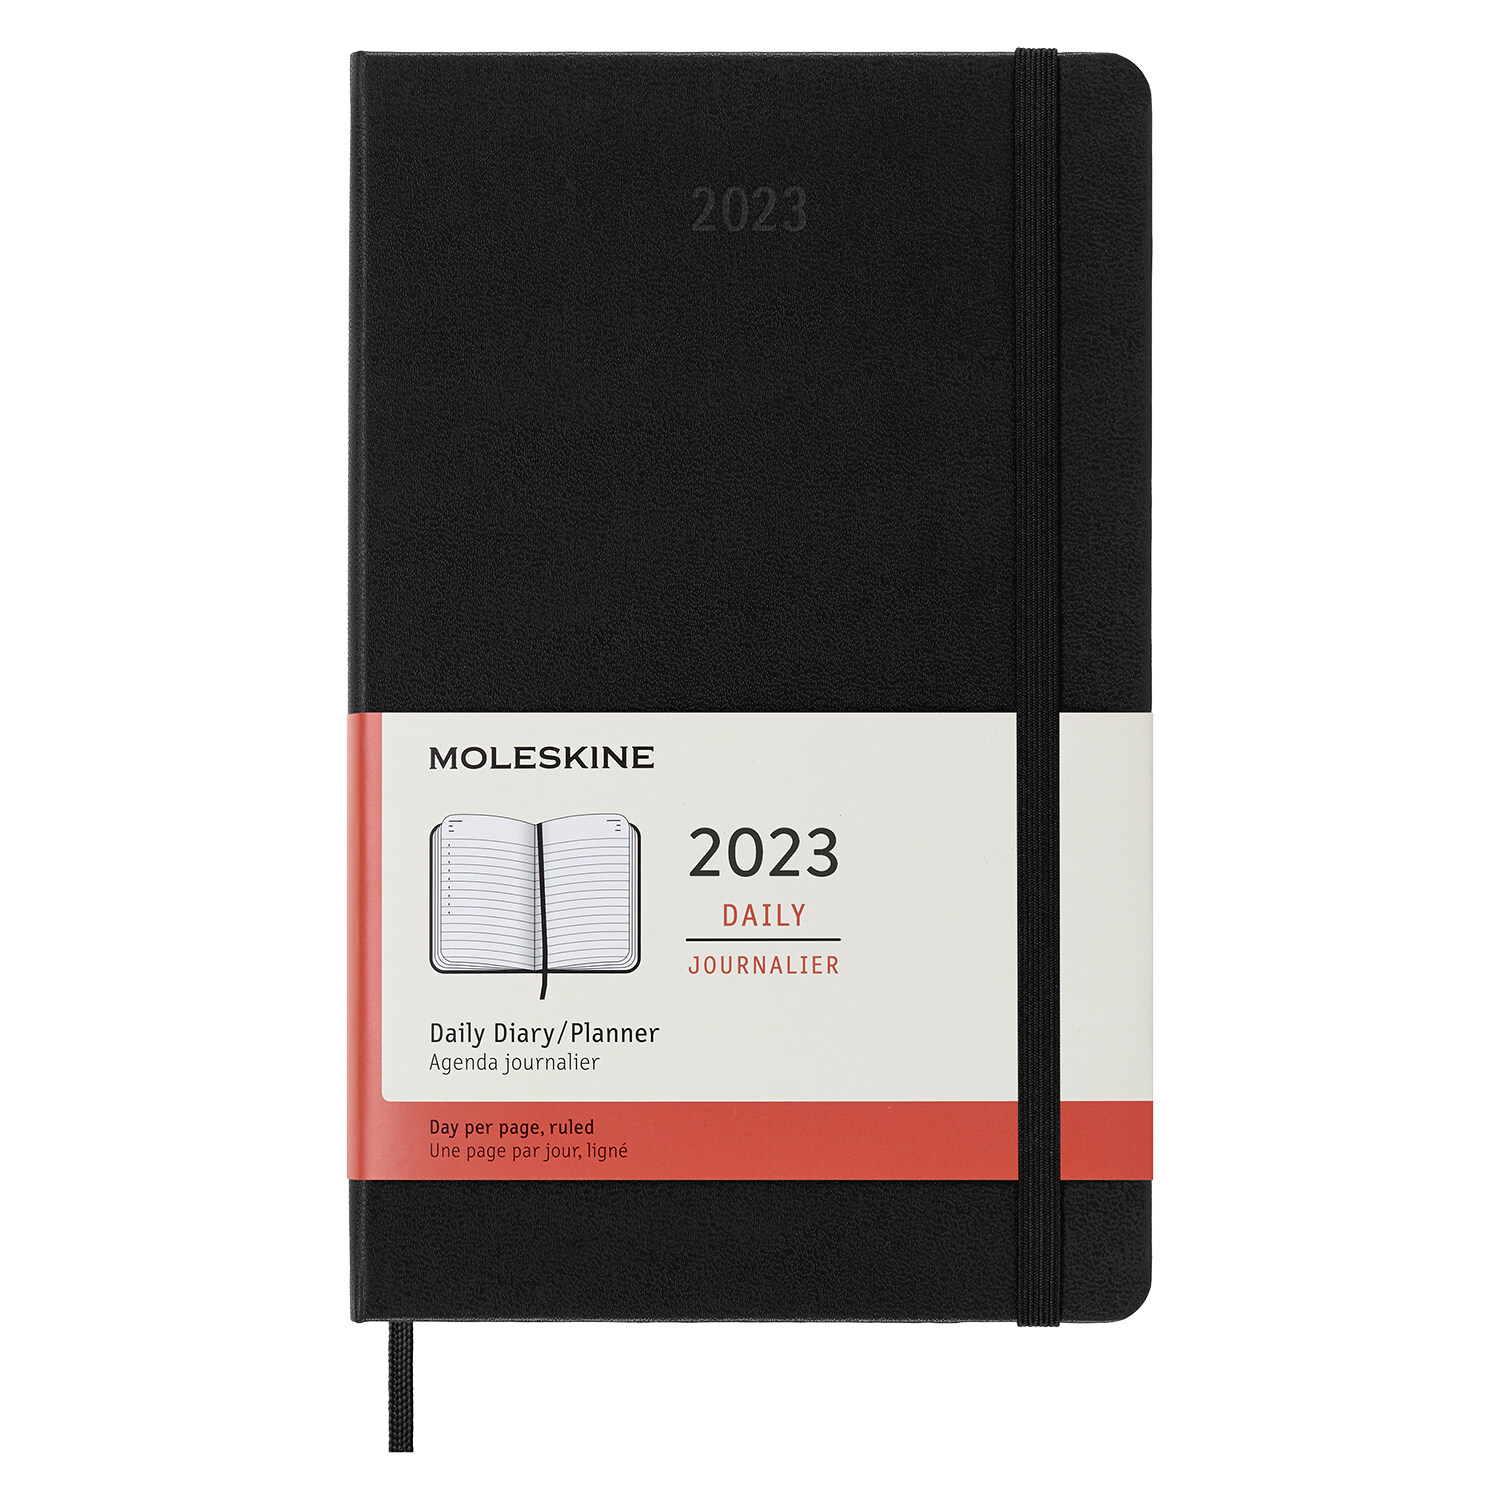 Moleskine 2023 Daily Planner, 12m, Large, Black, Hard Cover (5 X 8.25) (Other)